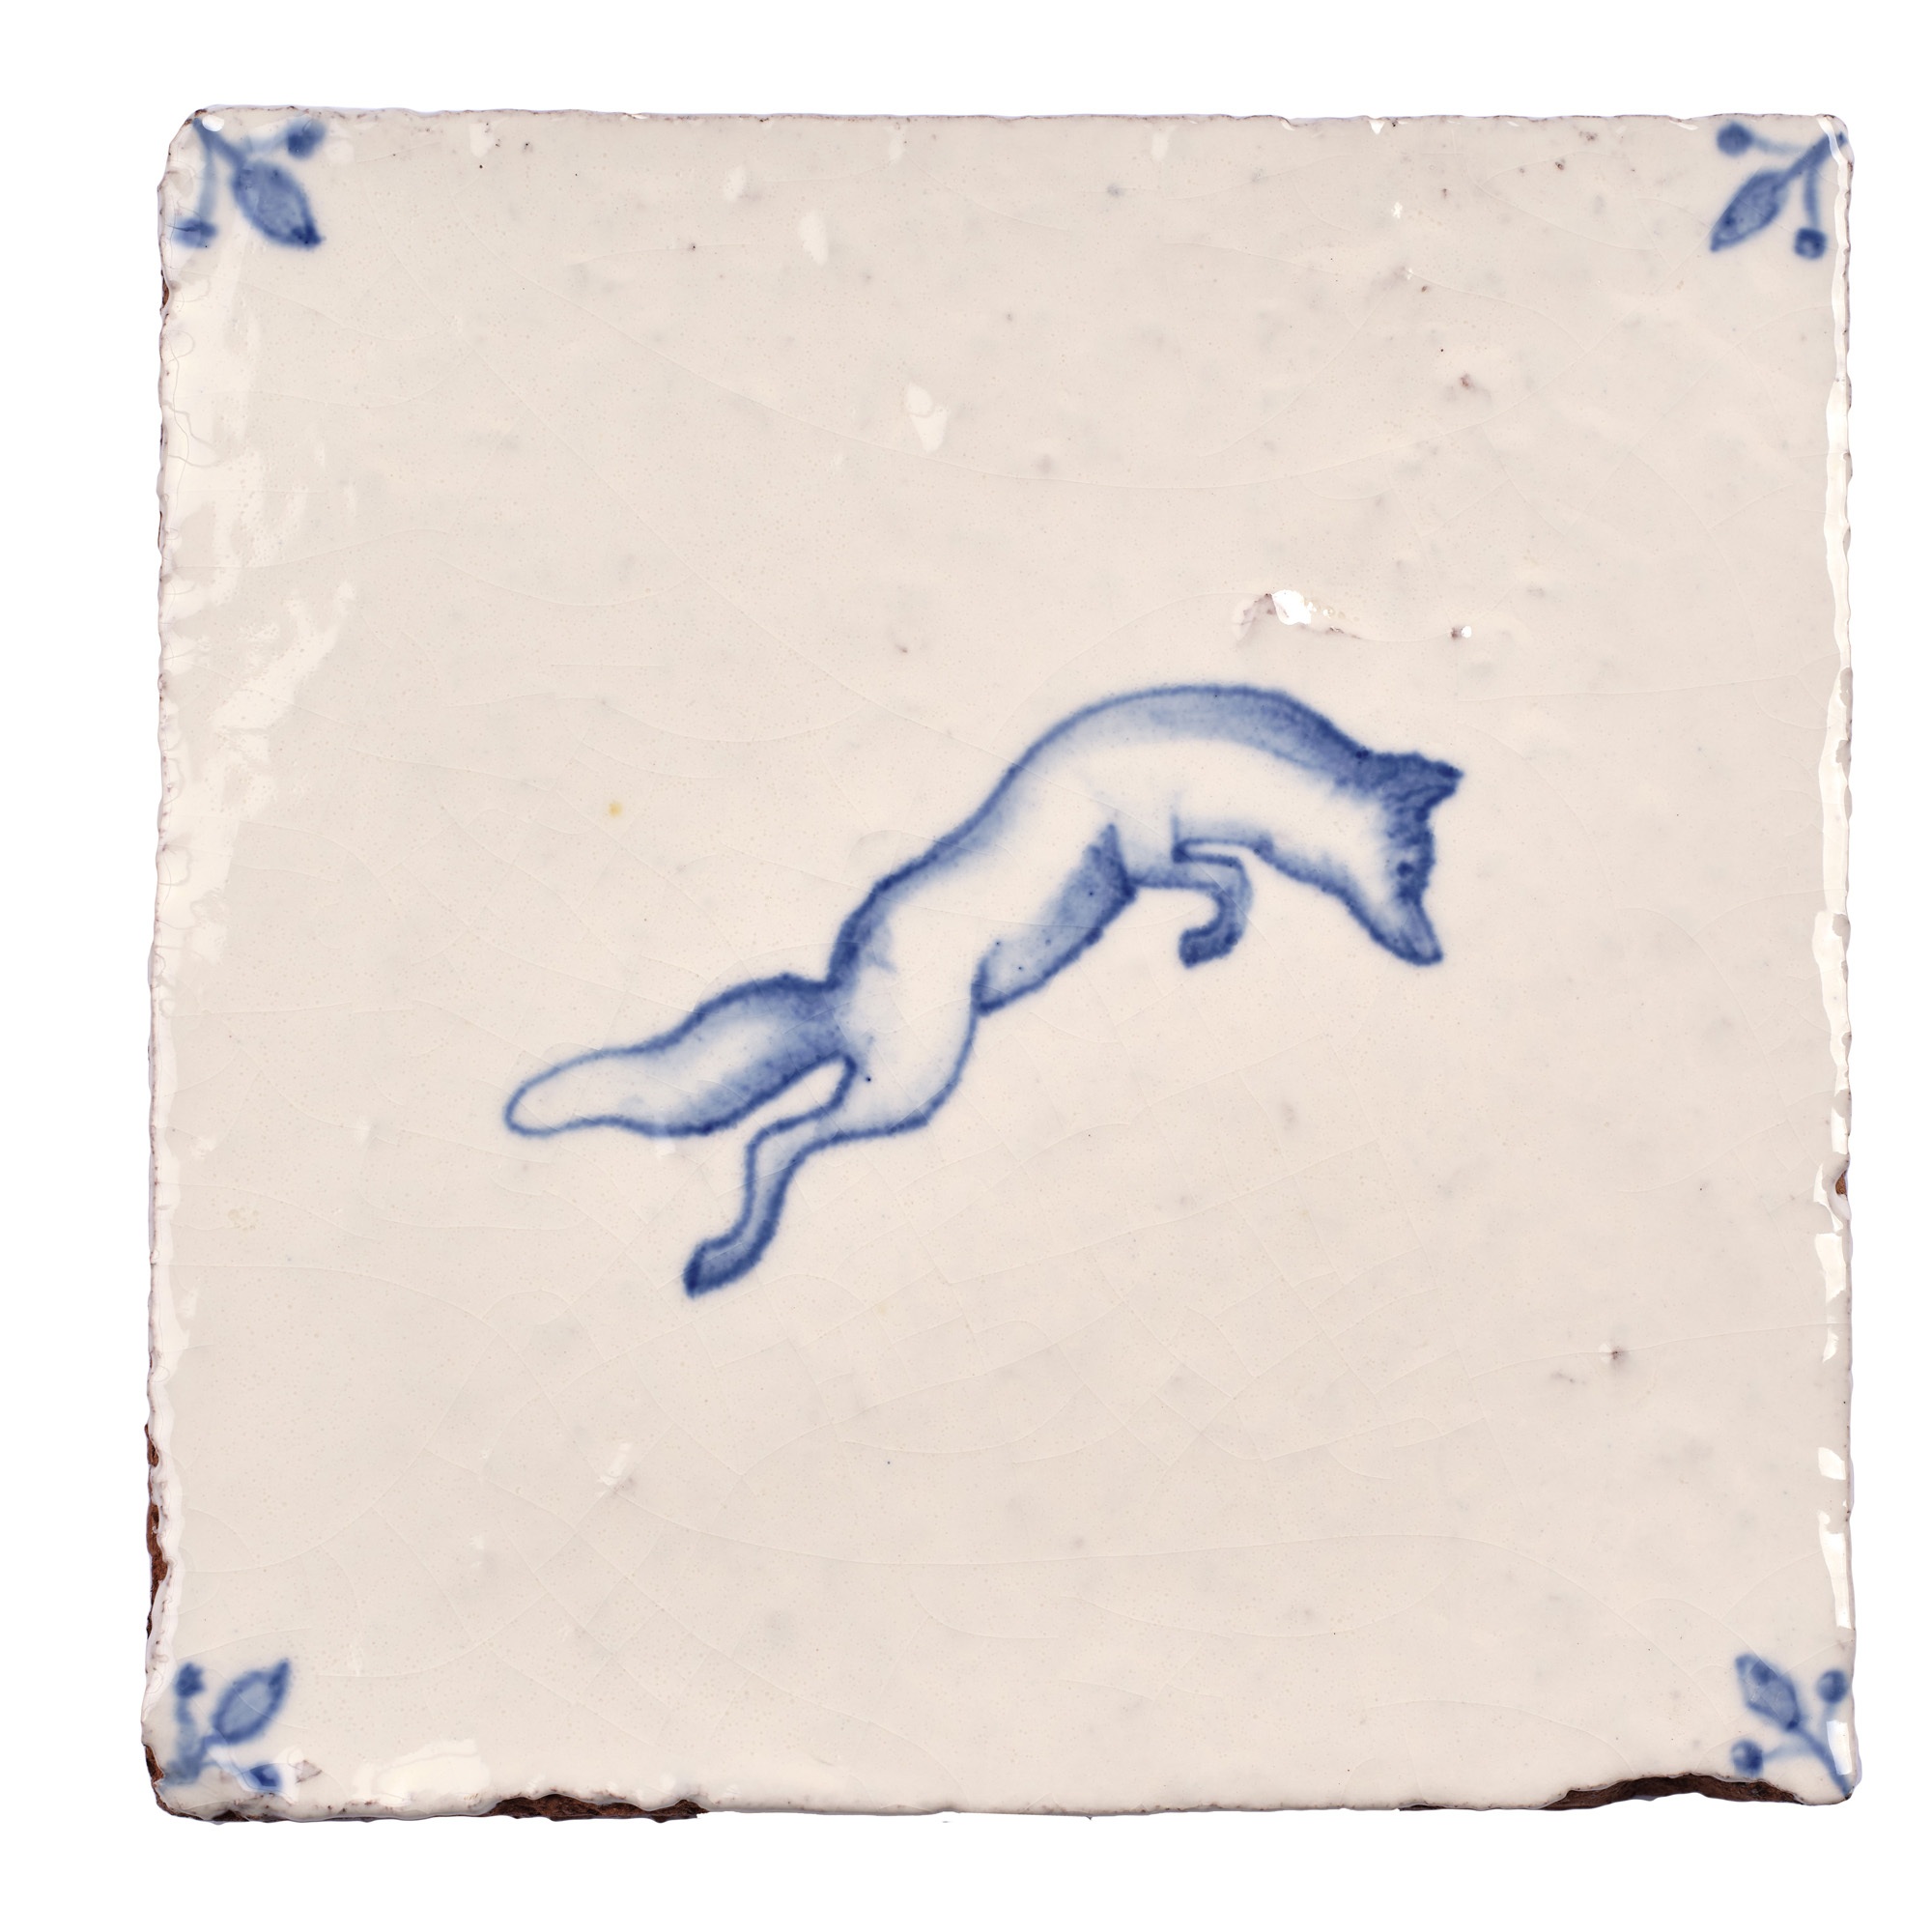 Wilding Fox with Corner Motif Square, product variant image